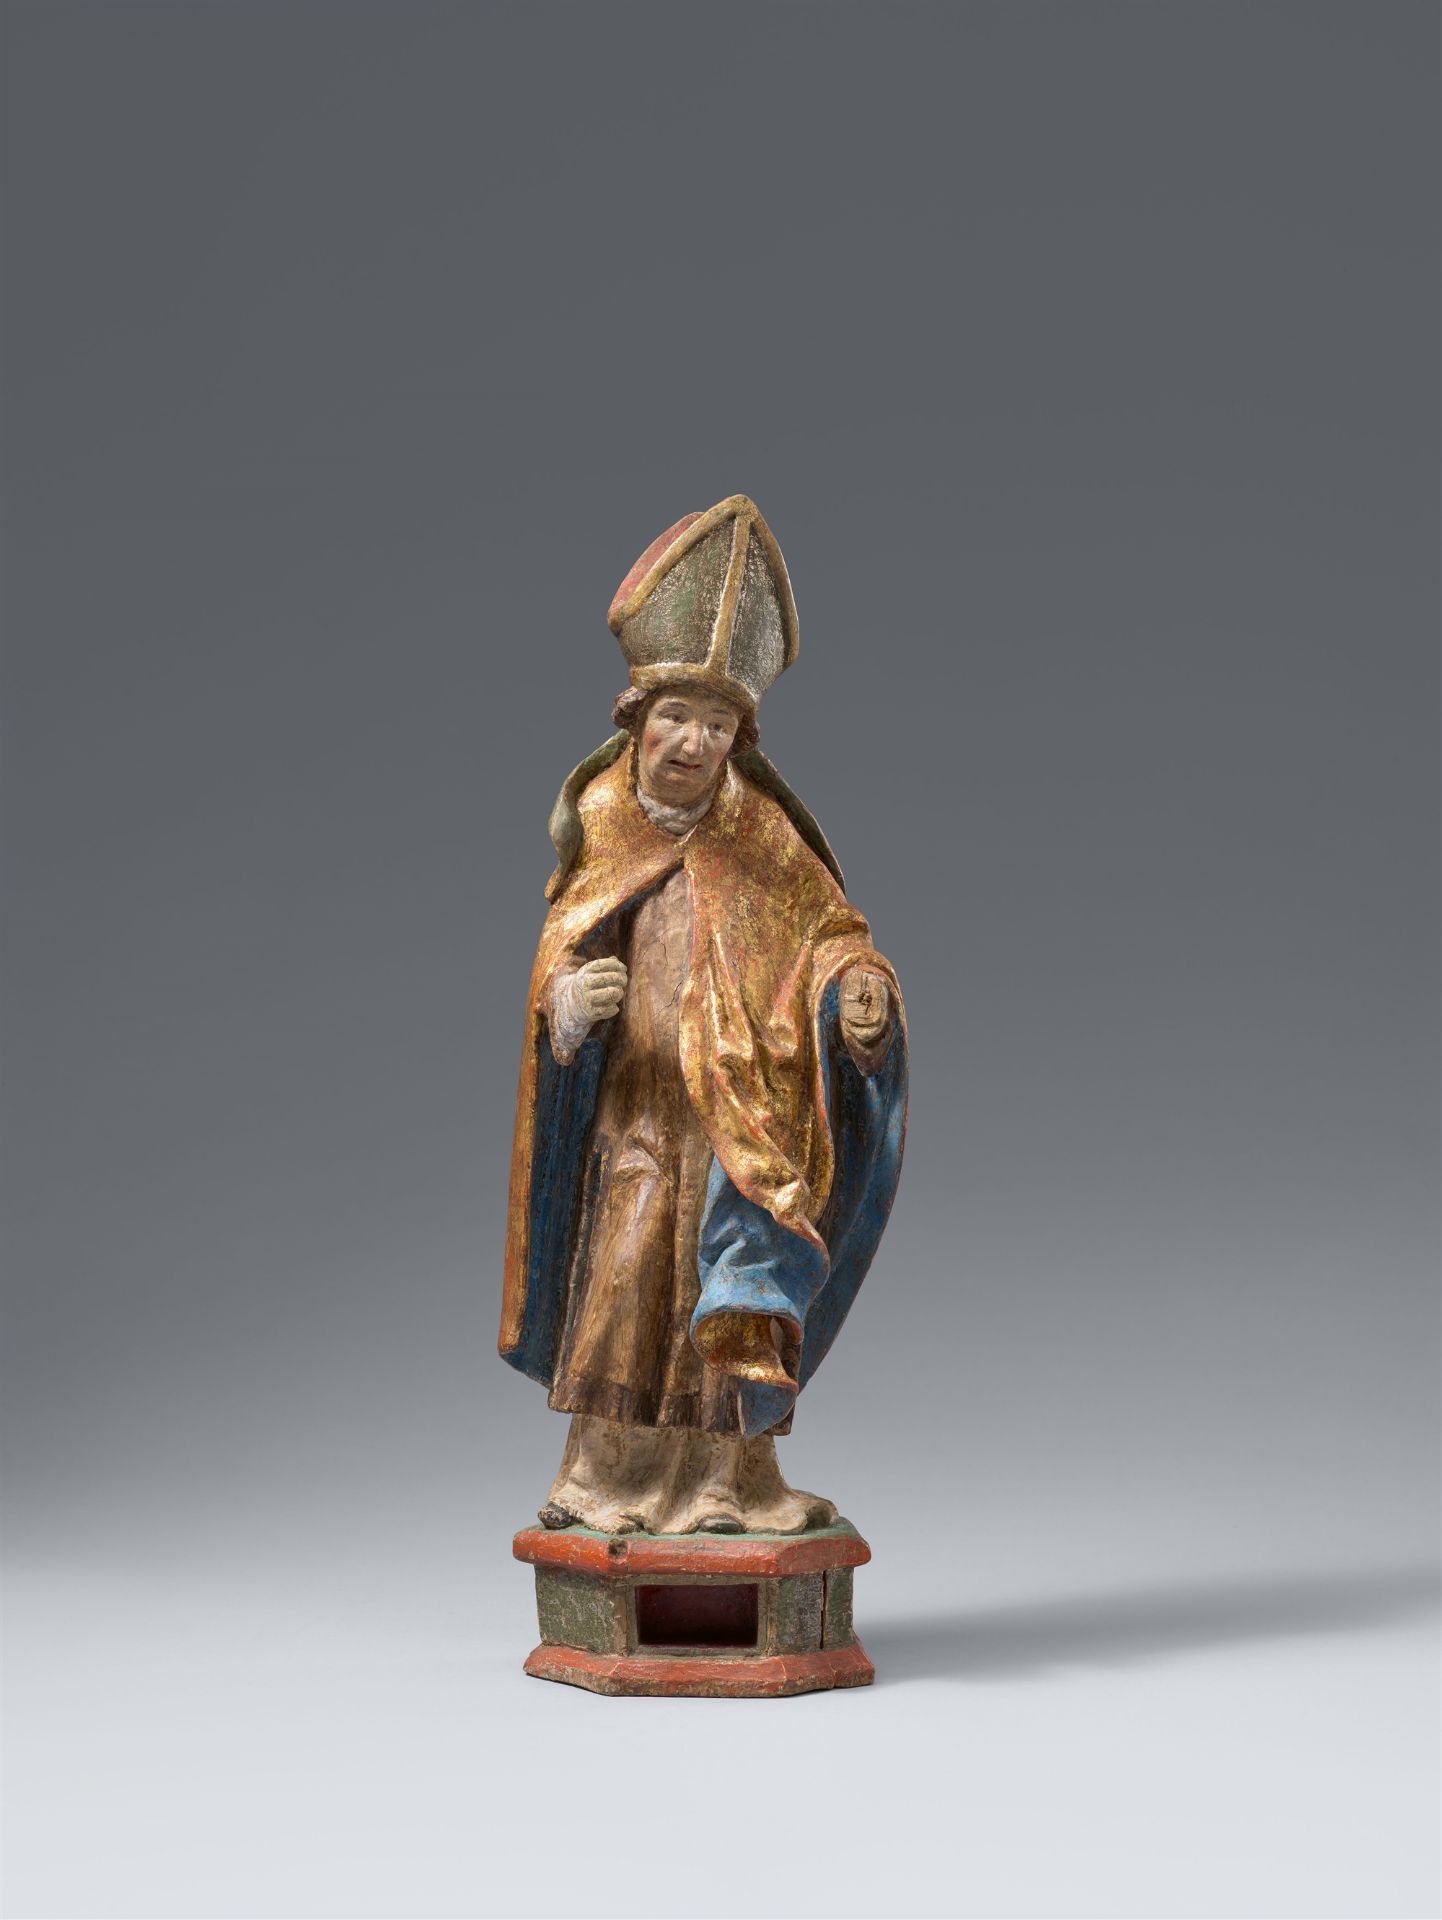 A carved wood figure of a bishop saint, South Germany, around 1500/1510